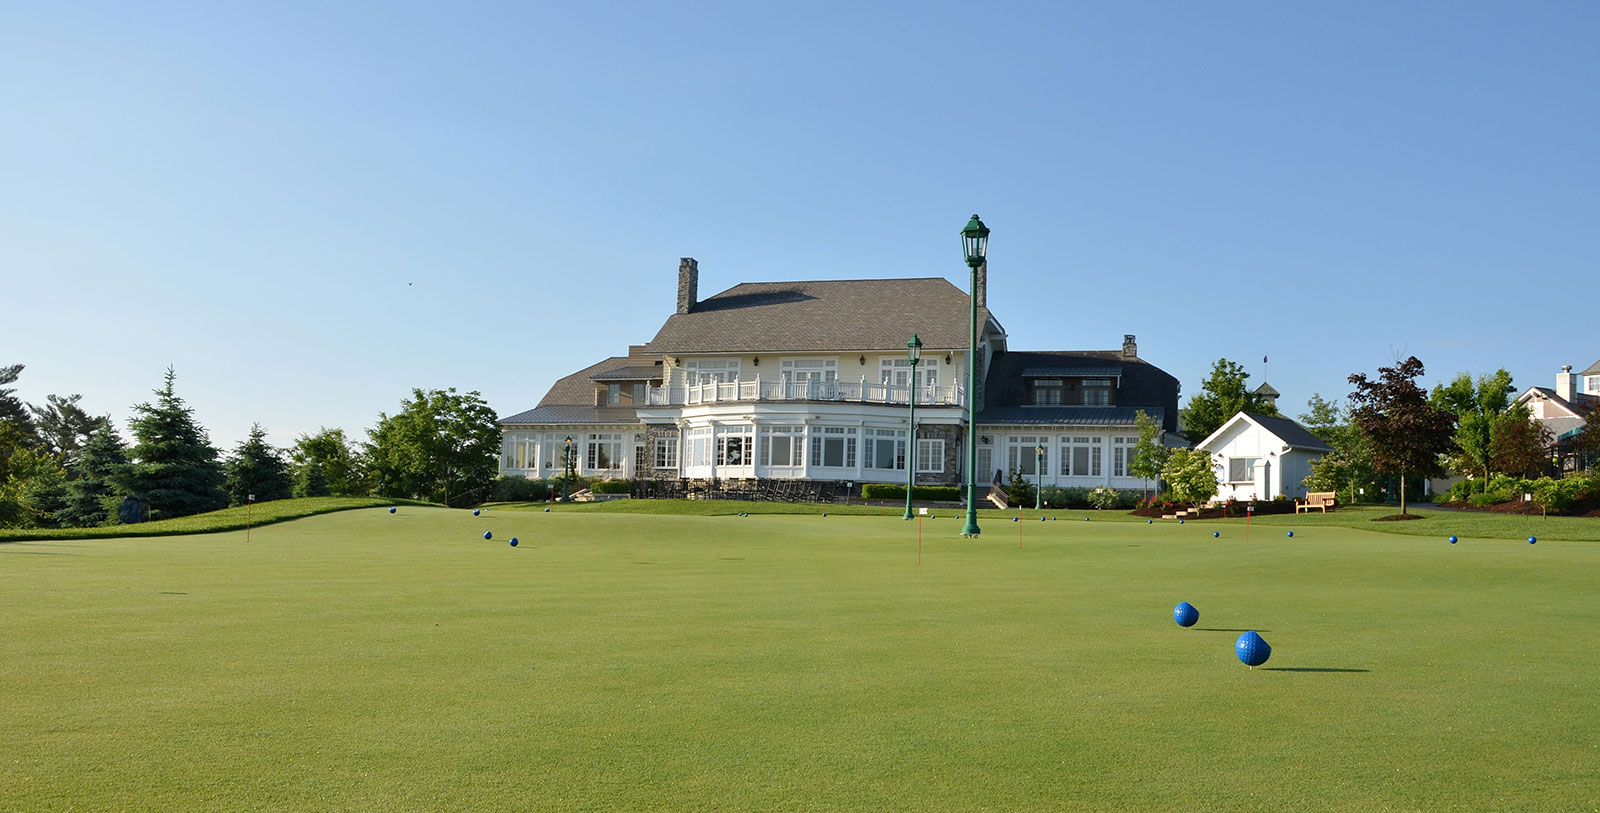 Image of Putting Green, The Hotel Hershey, 1933, Member of Historic Hotels of America, Hershey, Pennsylvania, Golf